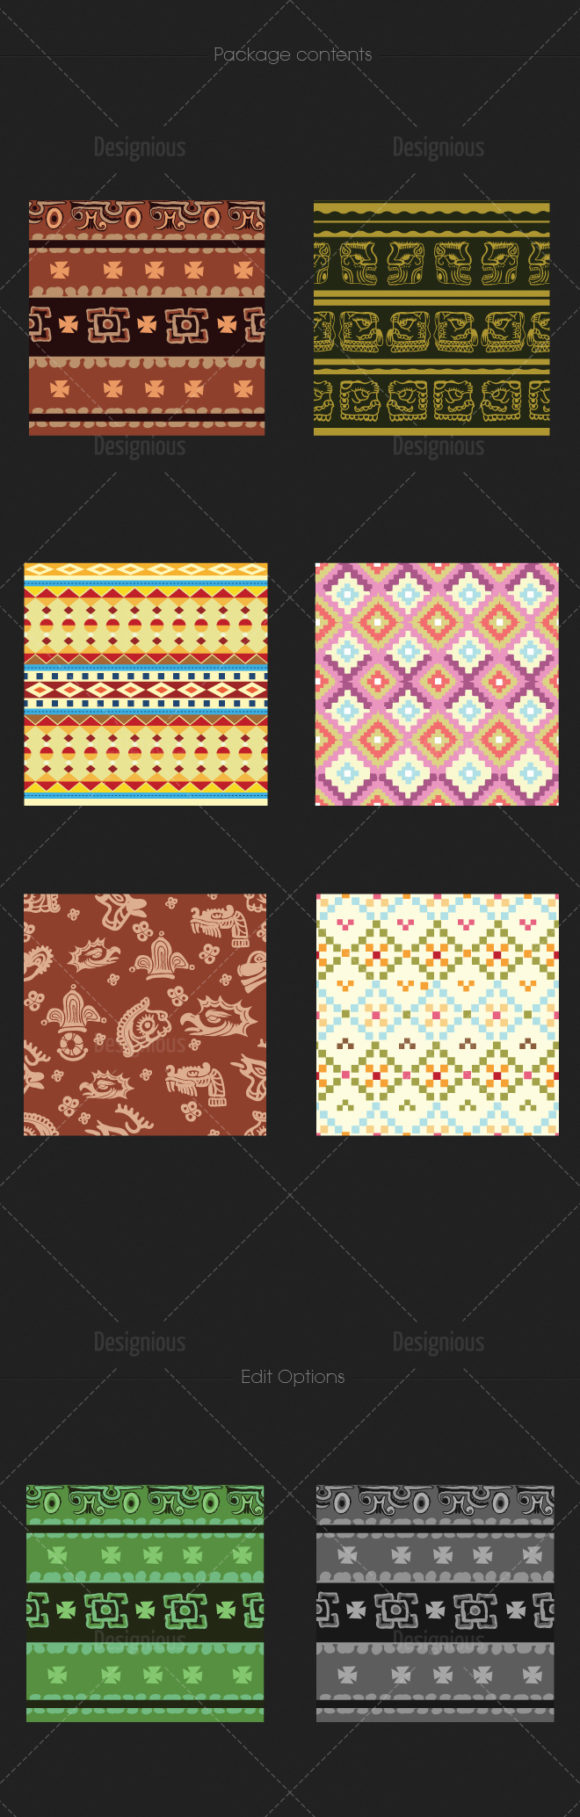 Seamless Patterns Vector Pack 99 2